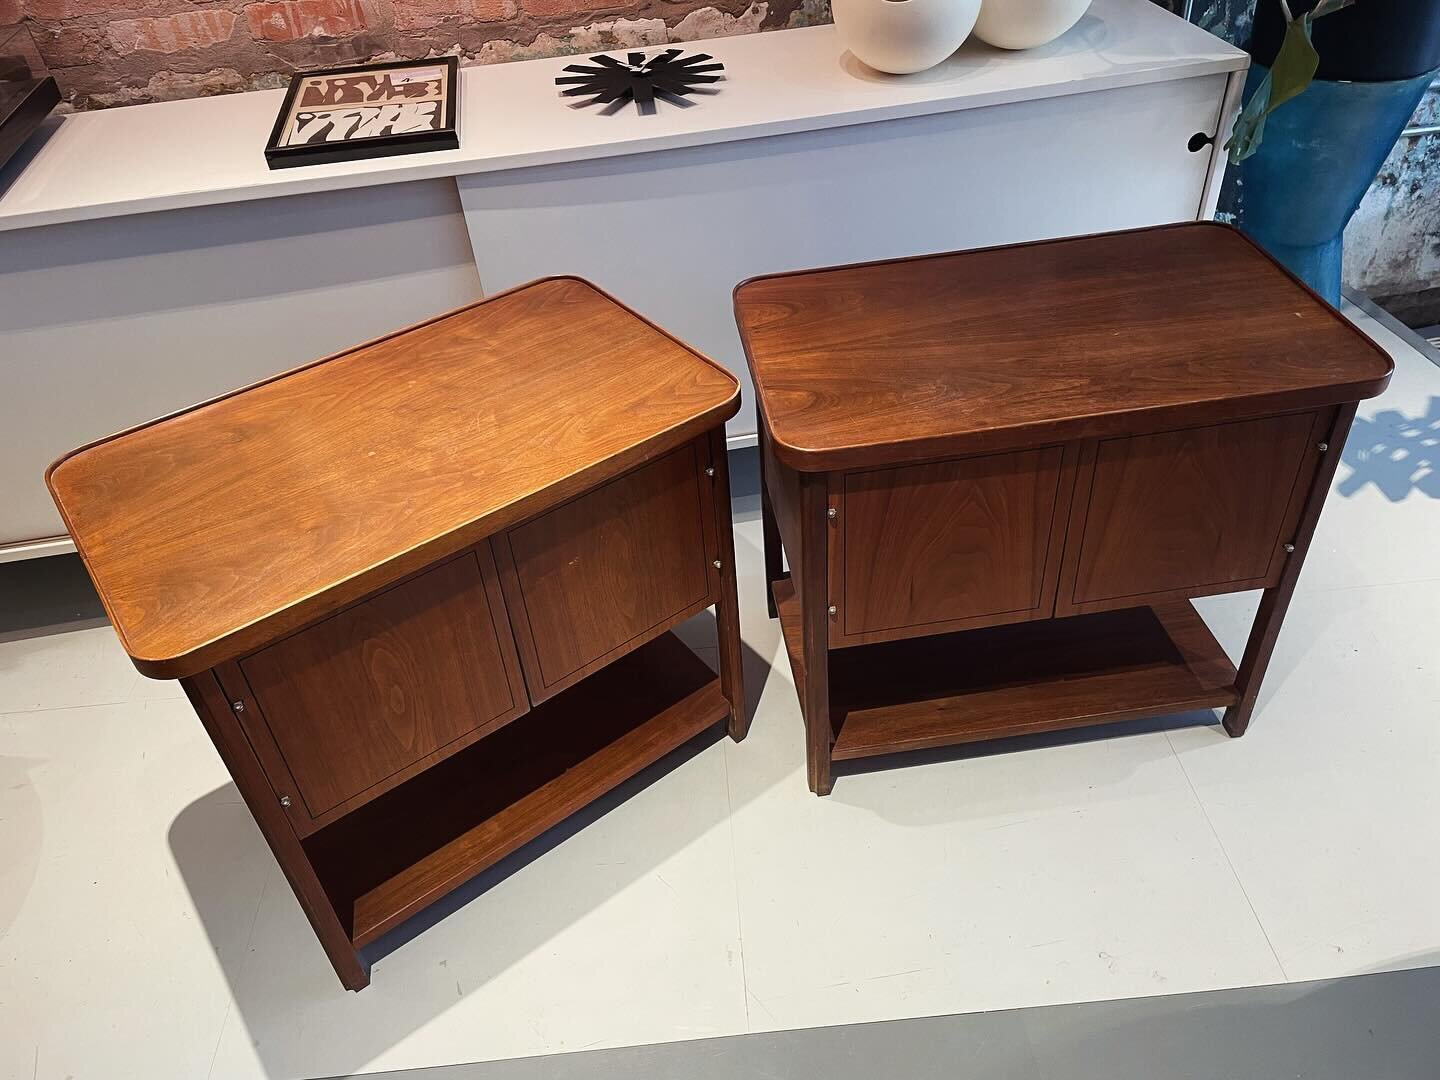 This pair of walnut Jack Cartwright for Founders nightstands just hit the shop today. (dims: 23&rdquo;w x 23&rdquo;d x 15&rdquo;h)